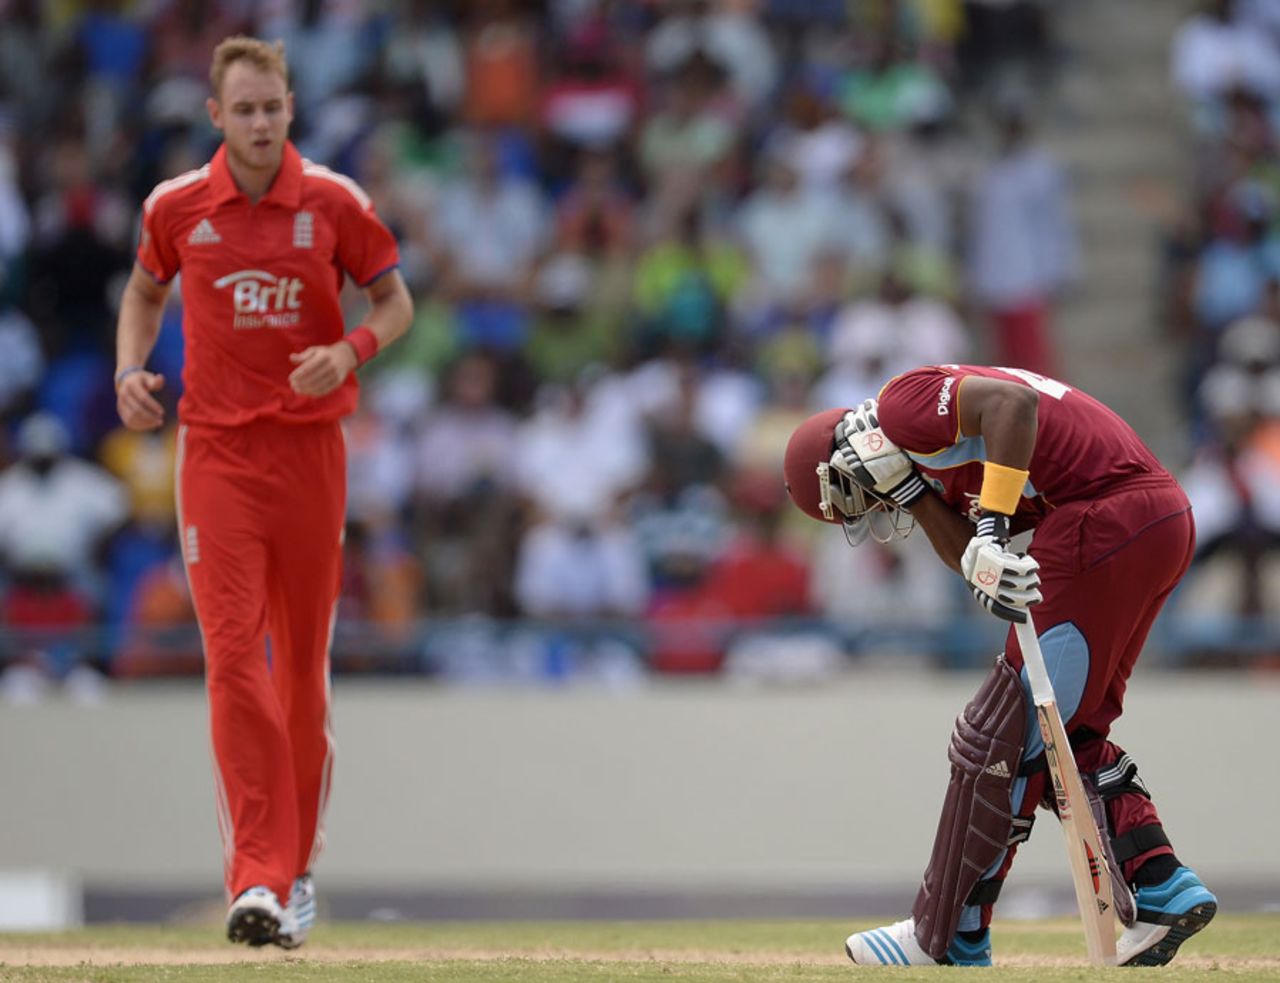 Stuart Broad struck Dwayne Bravo a painful blow on the head, West Indies v England, 2nd ODI, North Sound, March 2, 2014